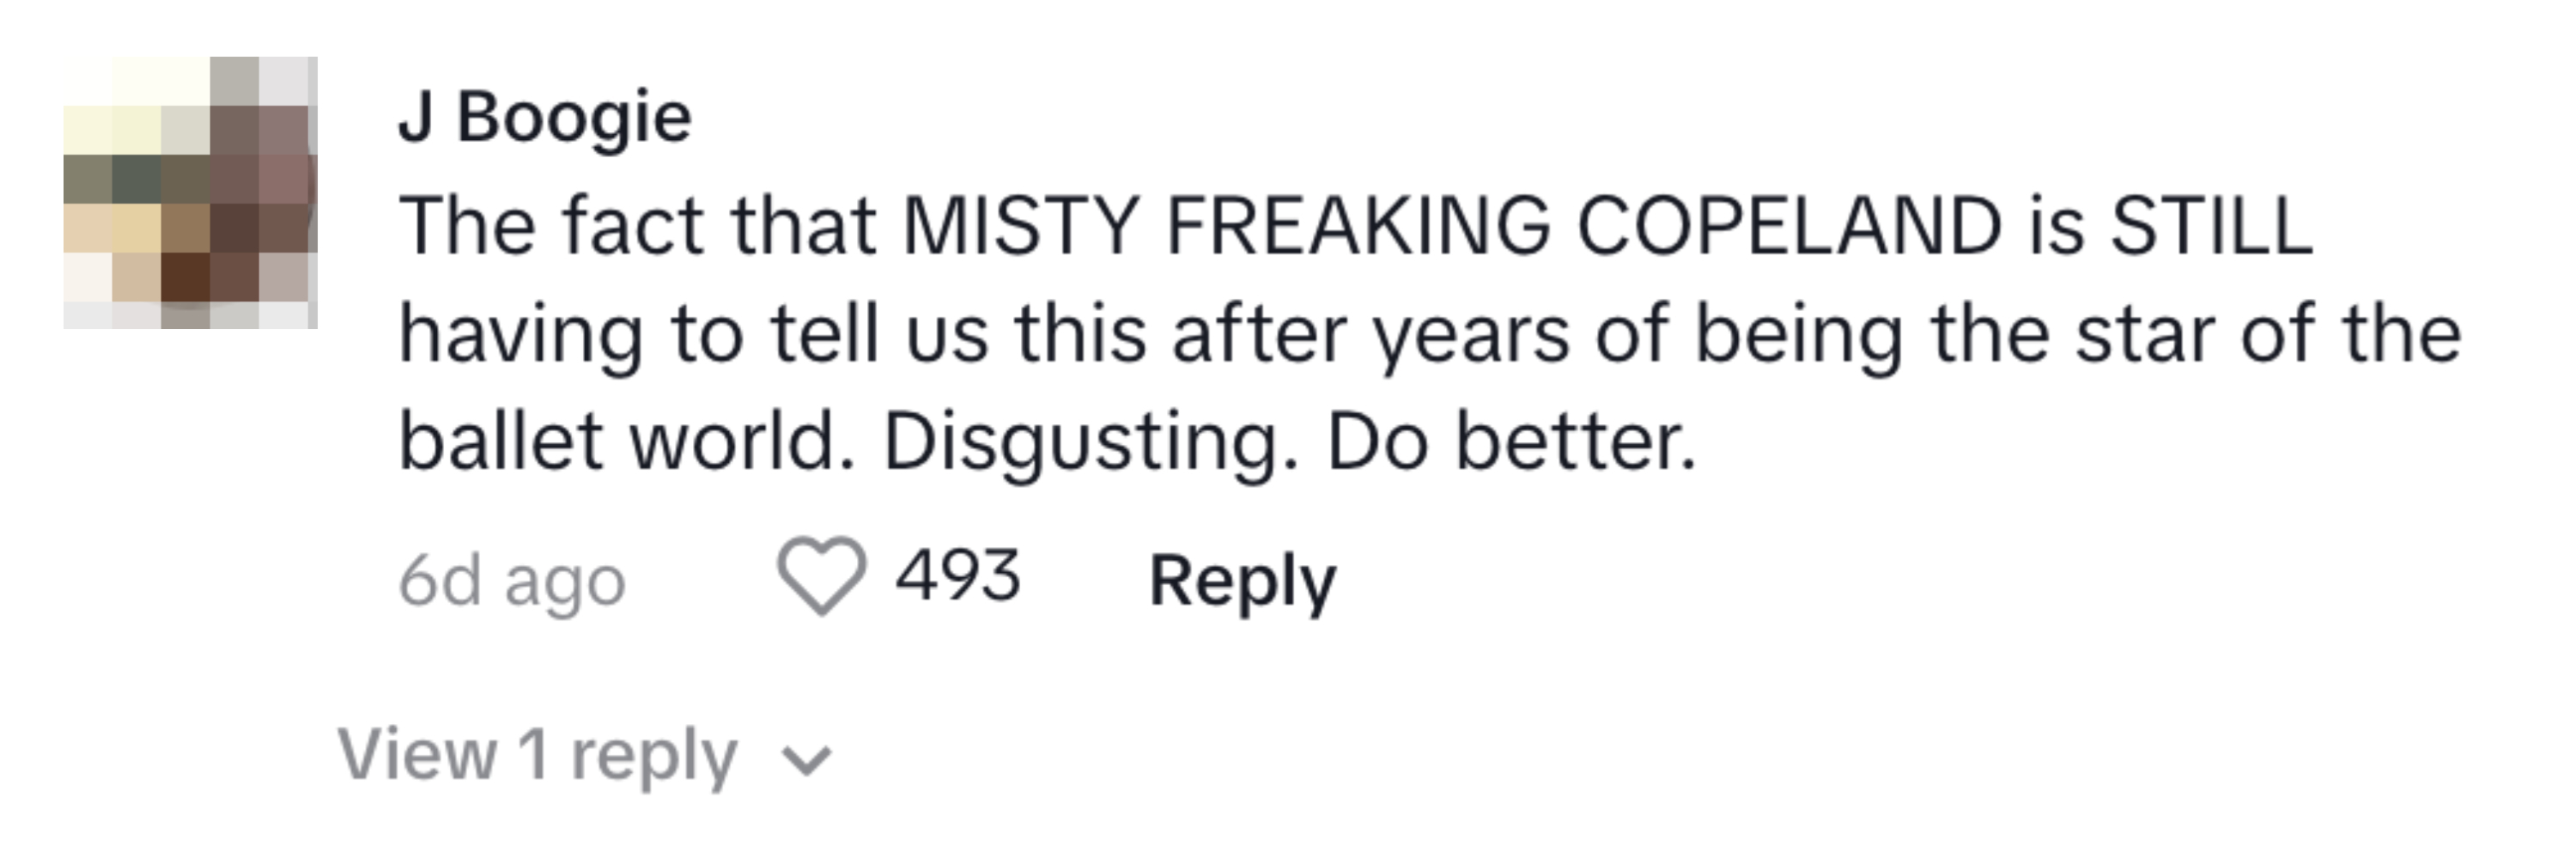 &quot;The fact that Misty FREAKING COPELAND IS still having to tell us this after years of being the star of the ballet world. Disgusting. Do better&quot;